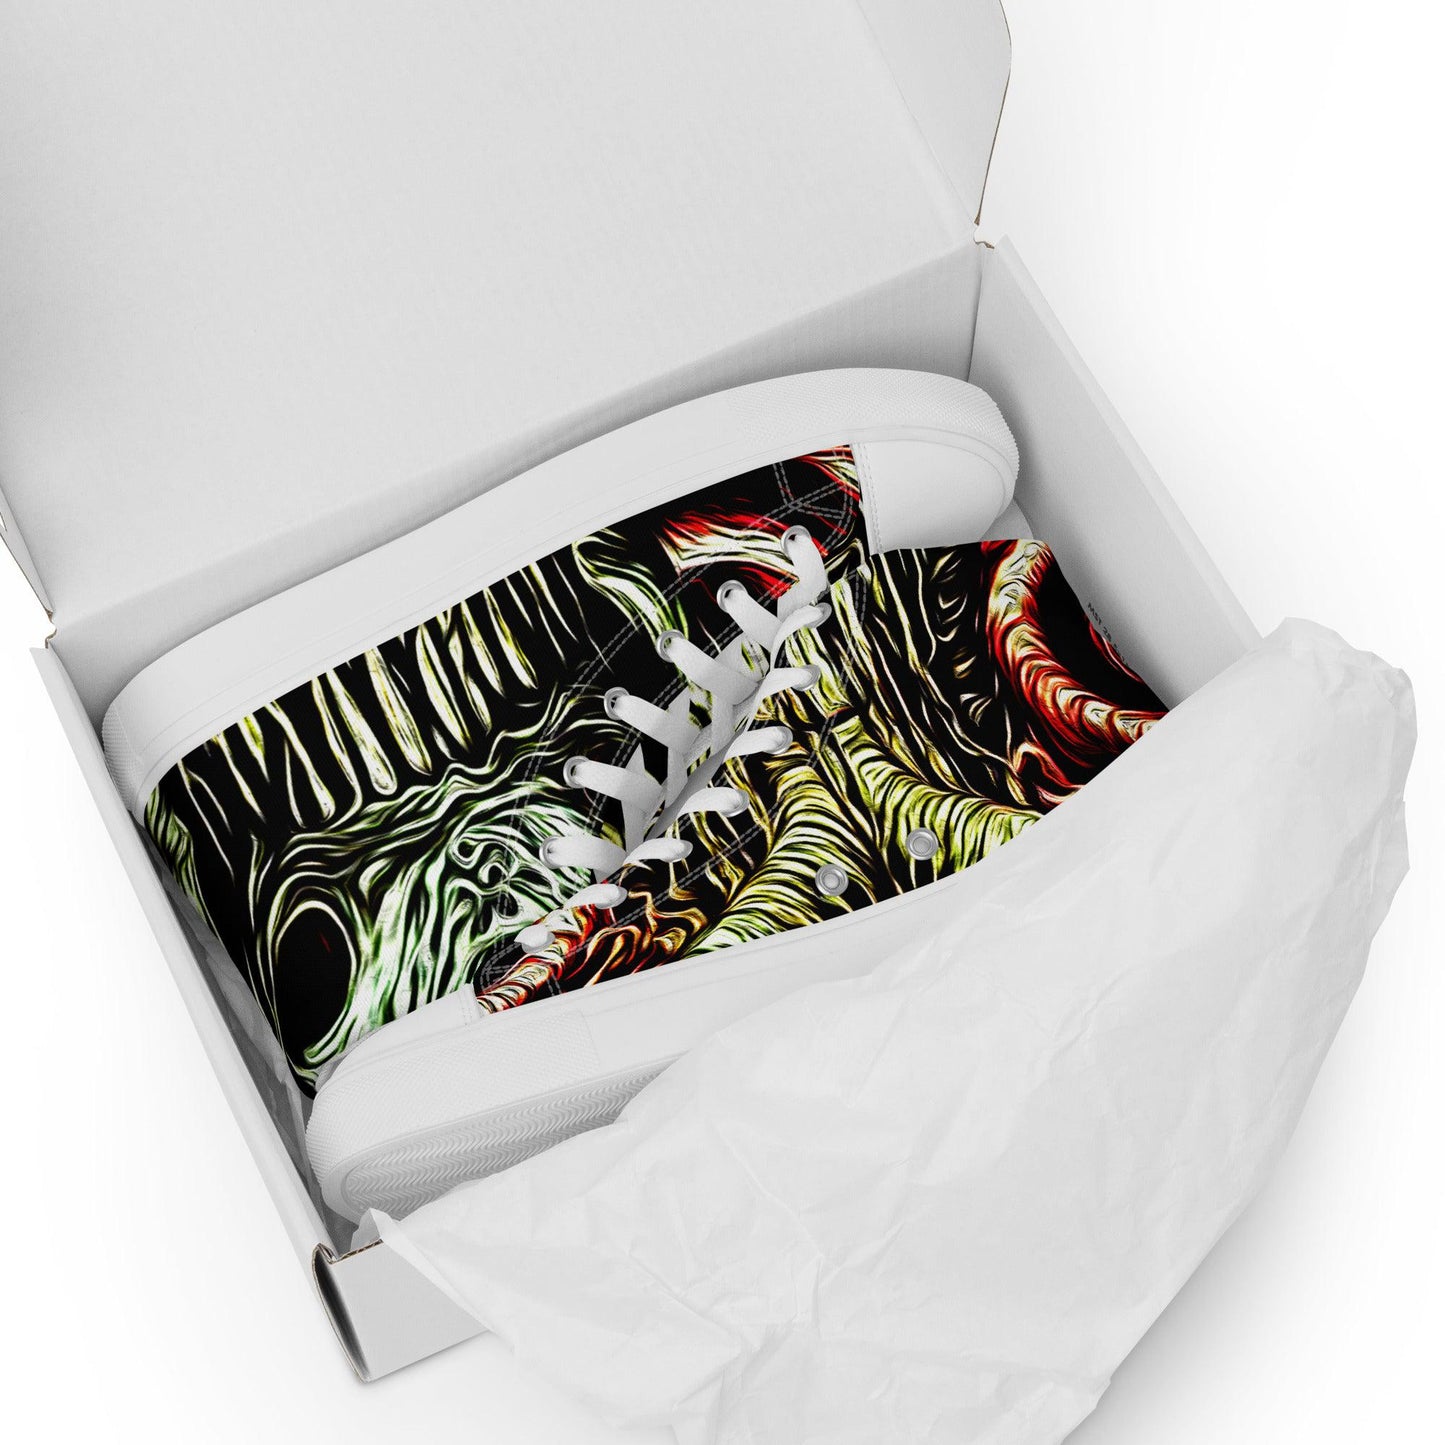 Cthulhu Vision High Top Canvas Shoes (Men’s)